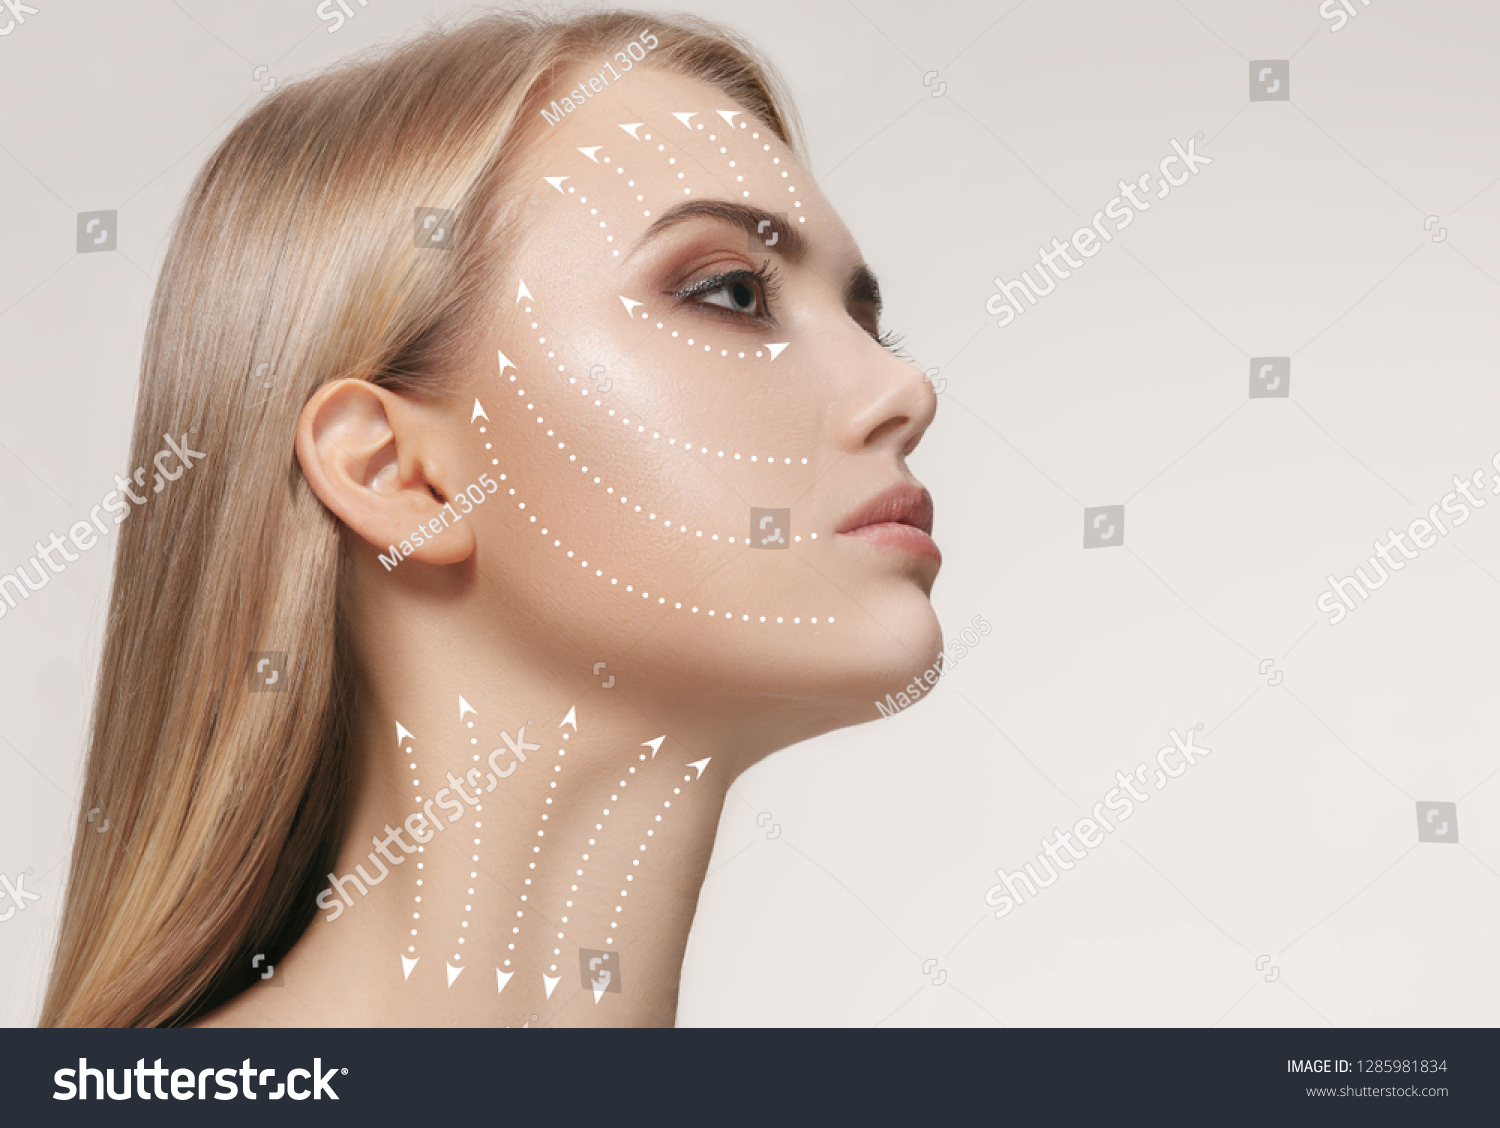 Close-up portrait of young, beautiful and healthy woman with arrows on her face. The spa, surgery, face lifting and skin care concept #1285981834